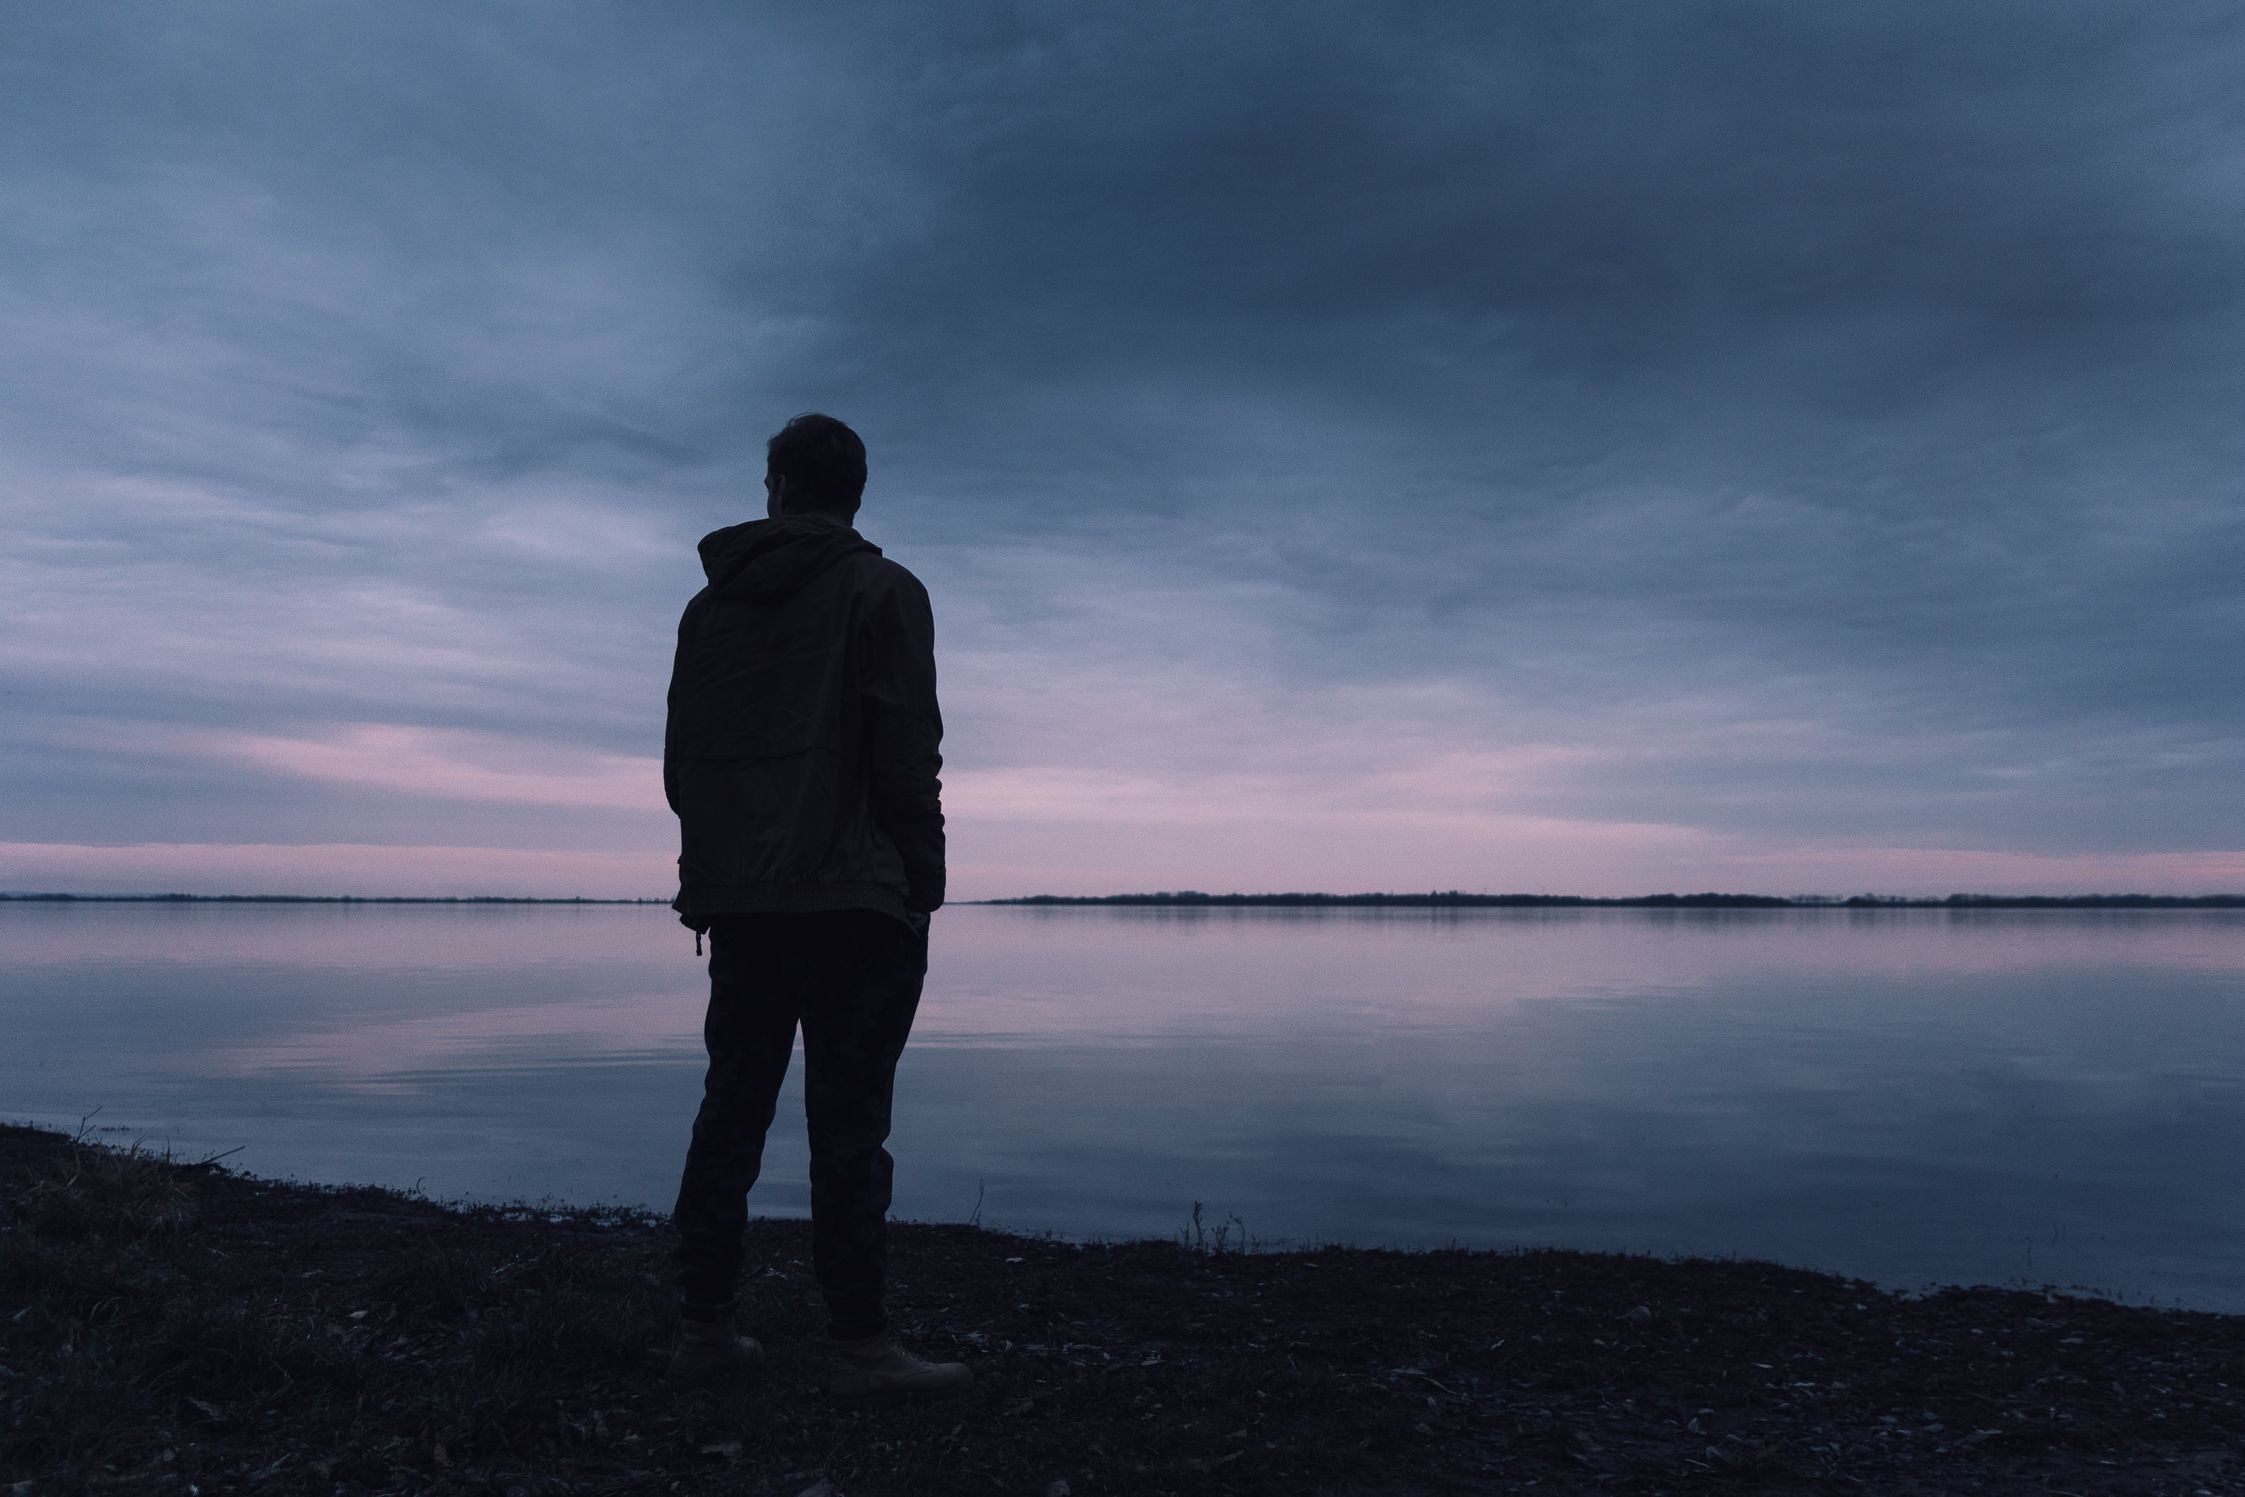 Man contemplating while looking our over a lake at twilight